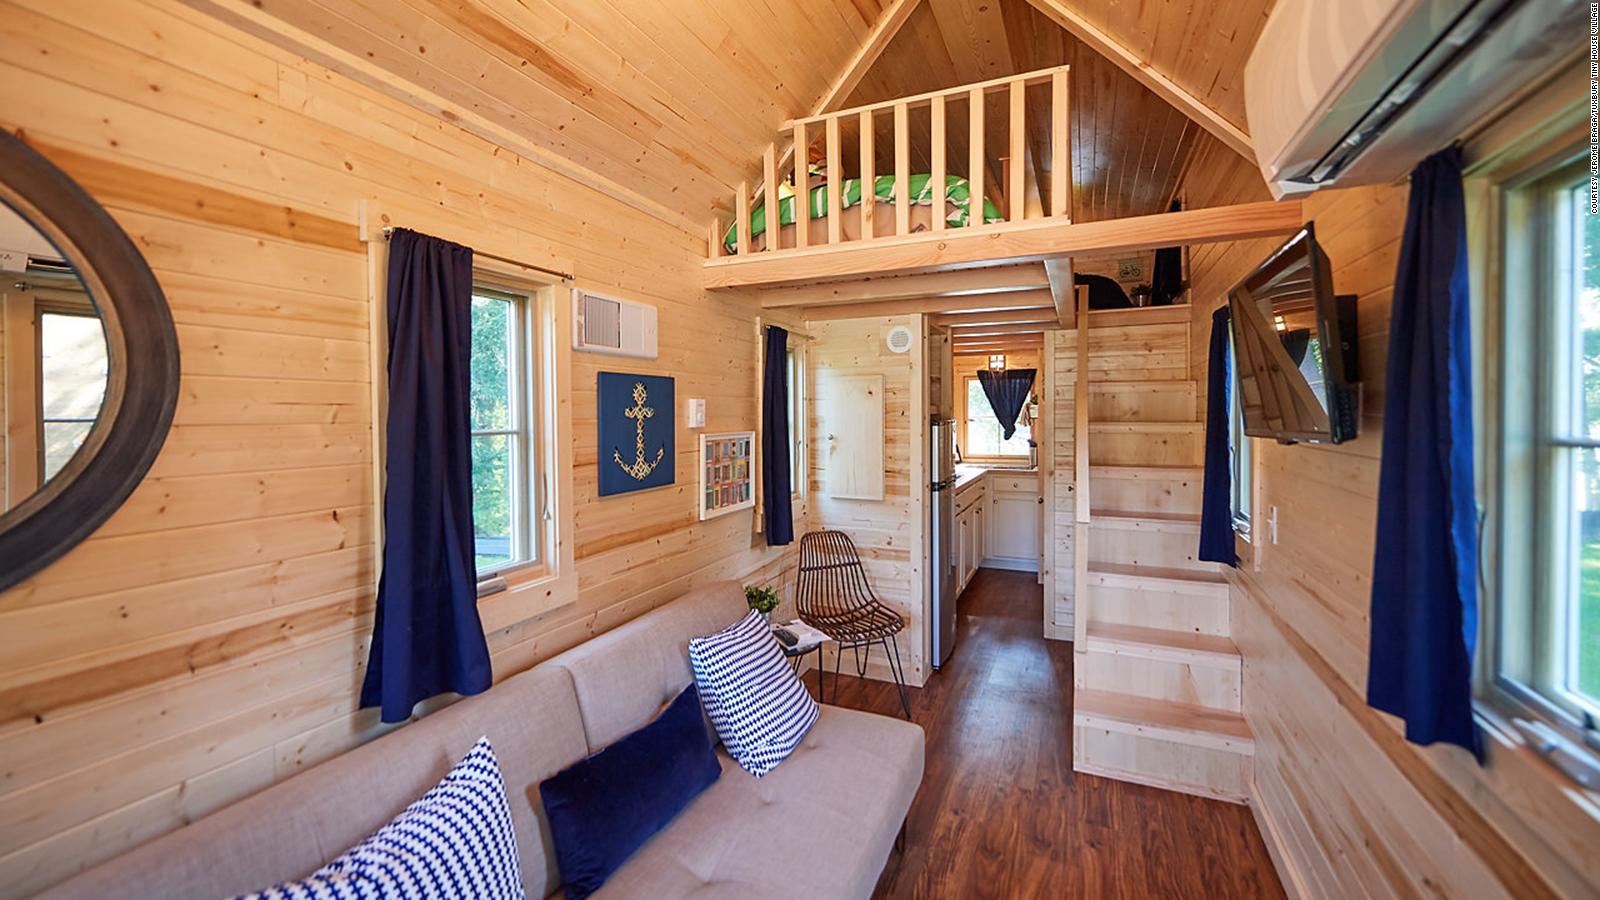 8 Tiny House Hotels That Are Big On Personality And Charm Cnn Travel,Cute Diy Gifts For Friends